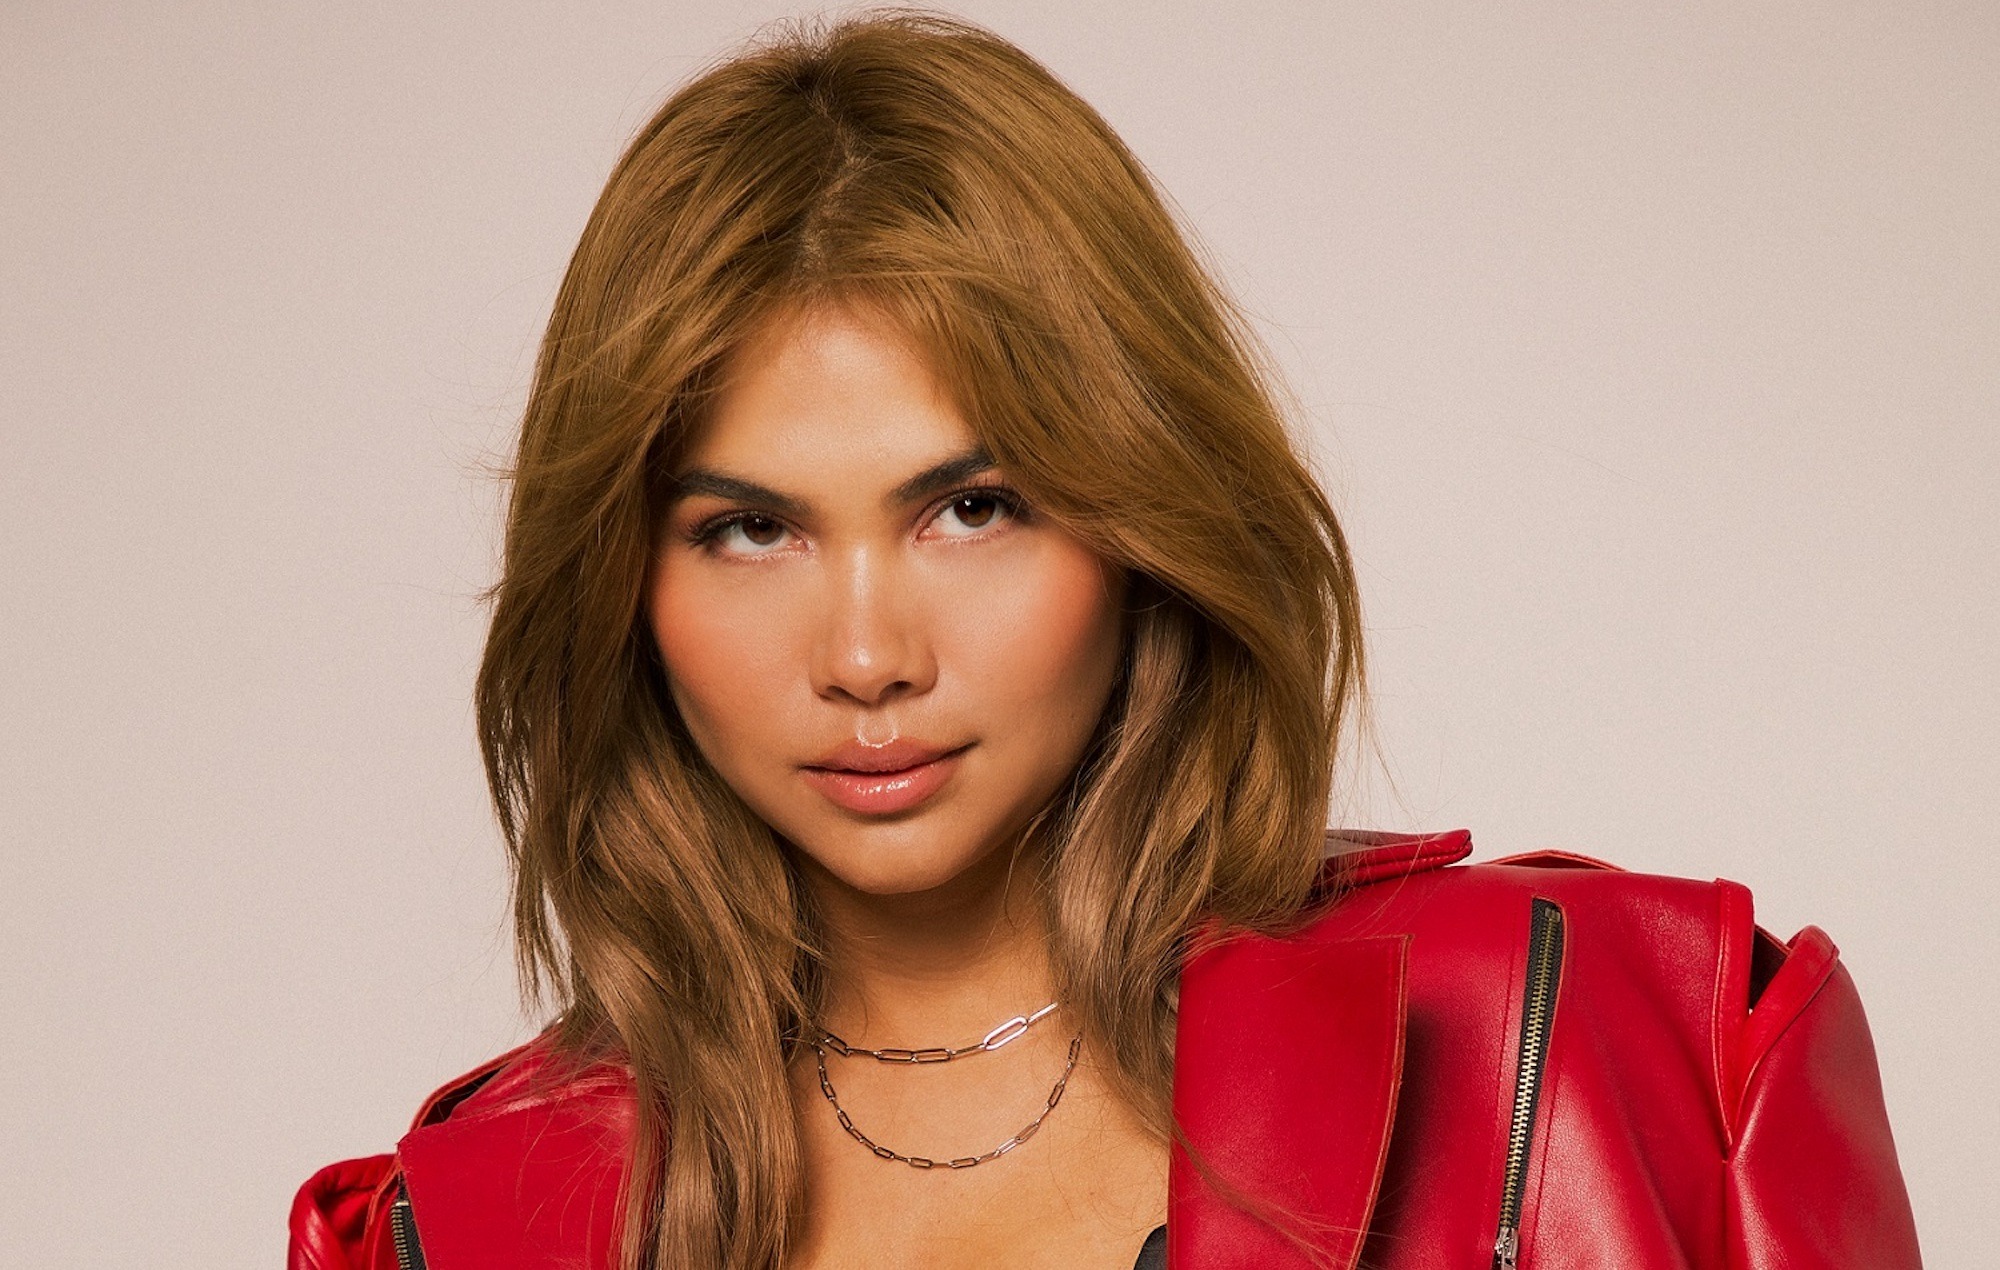 Five things we learned from our In Conversation video chat with Hayley Kiyoko